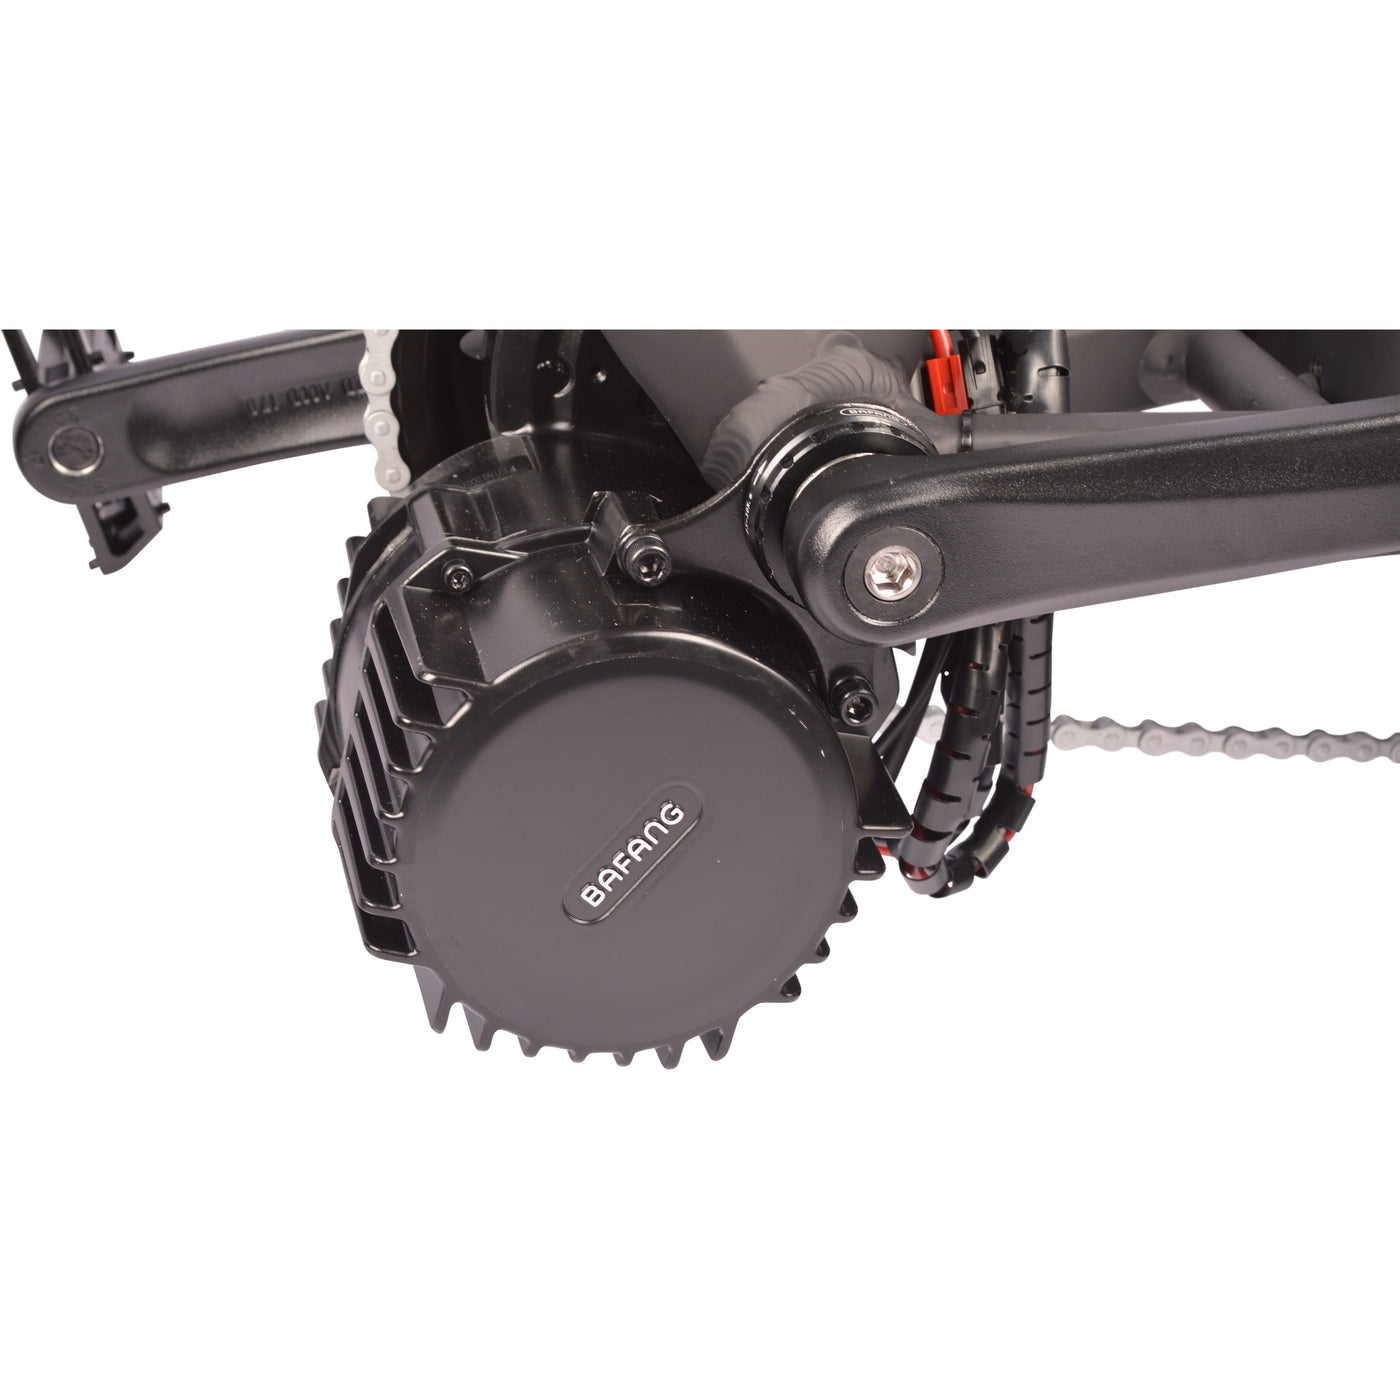 DJ Mid Drive Fat Bike, best electric mid drive fat bike with Bafang geared brushless mid drive motor